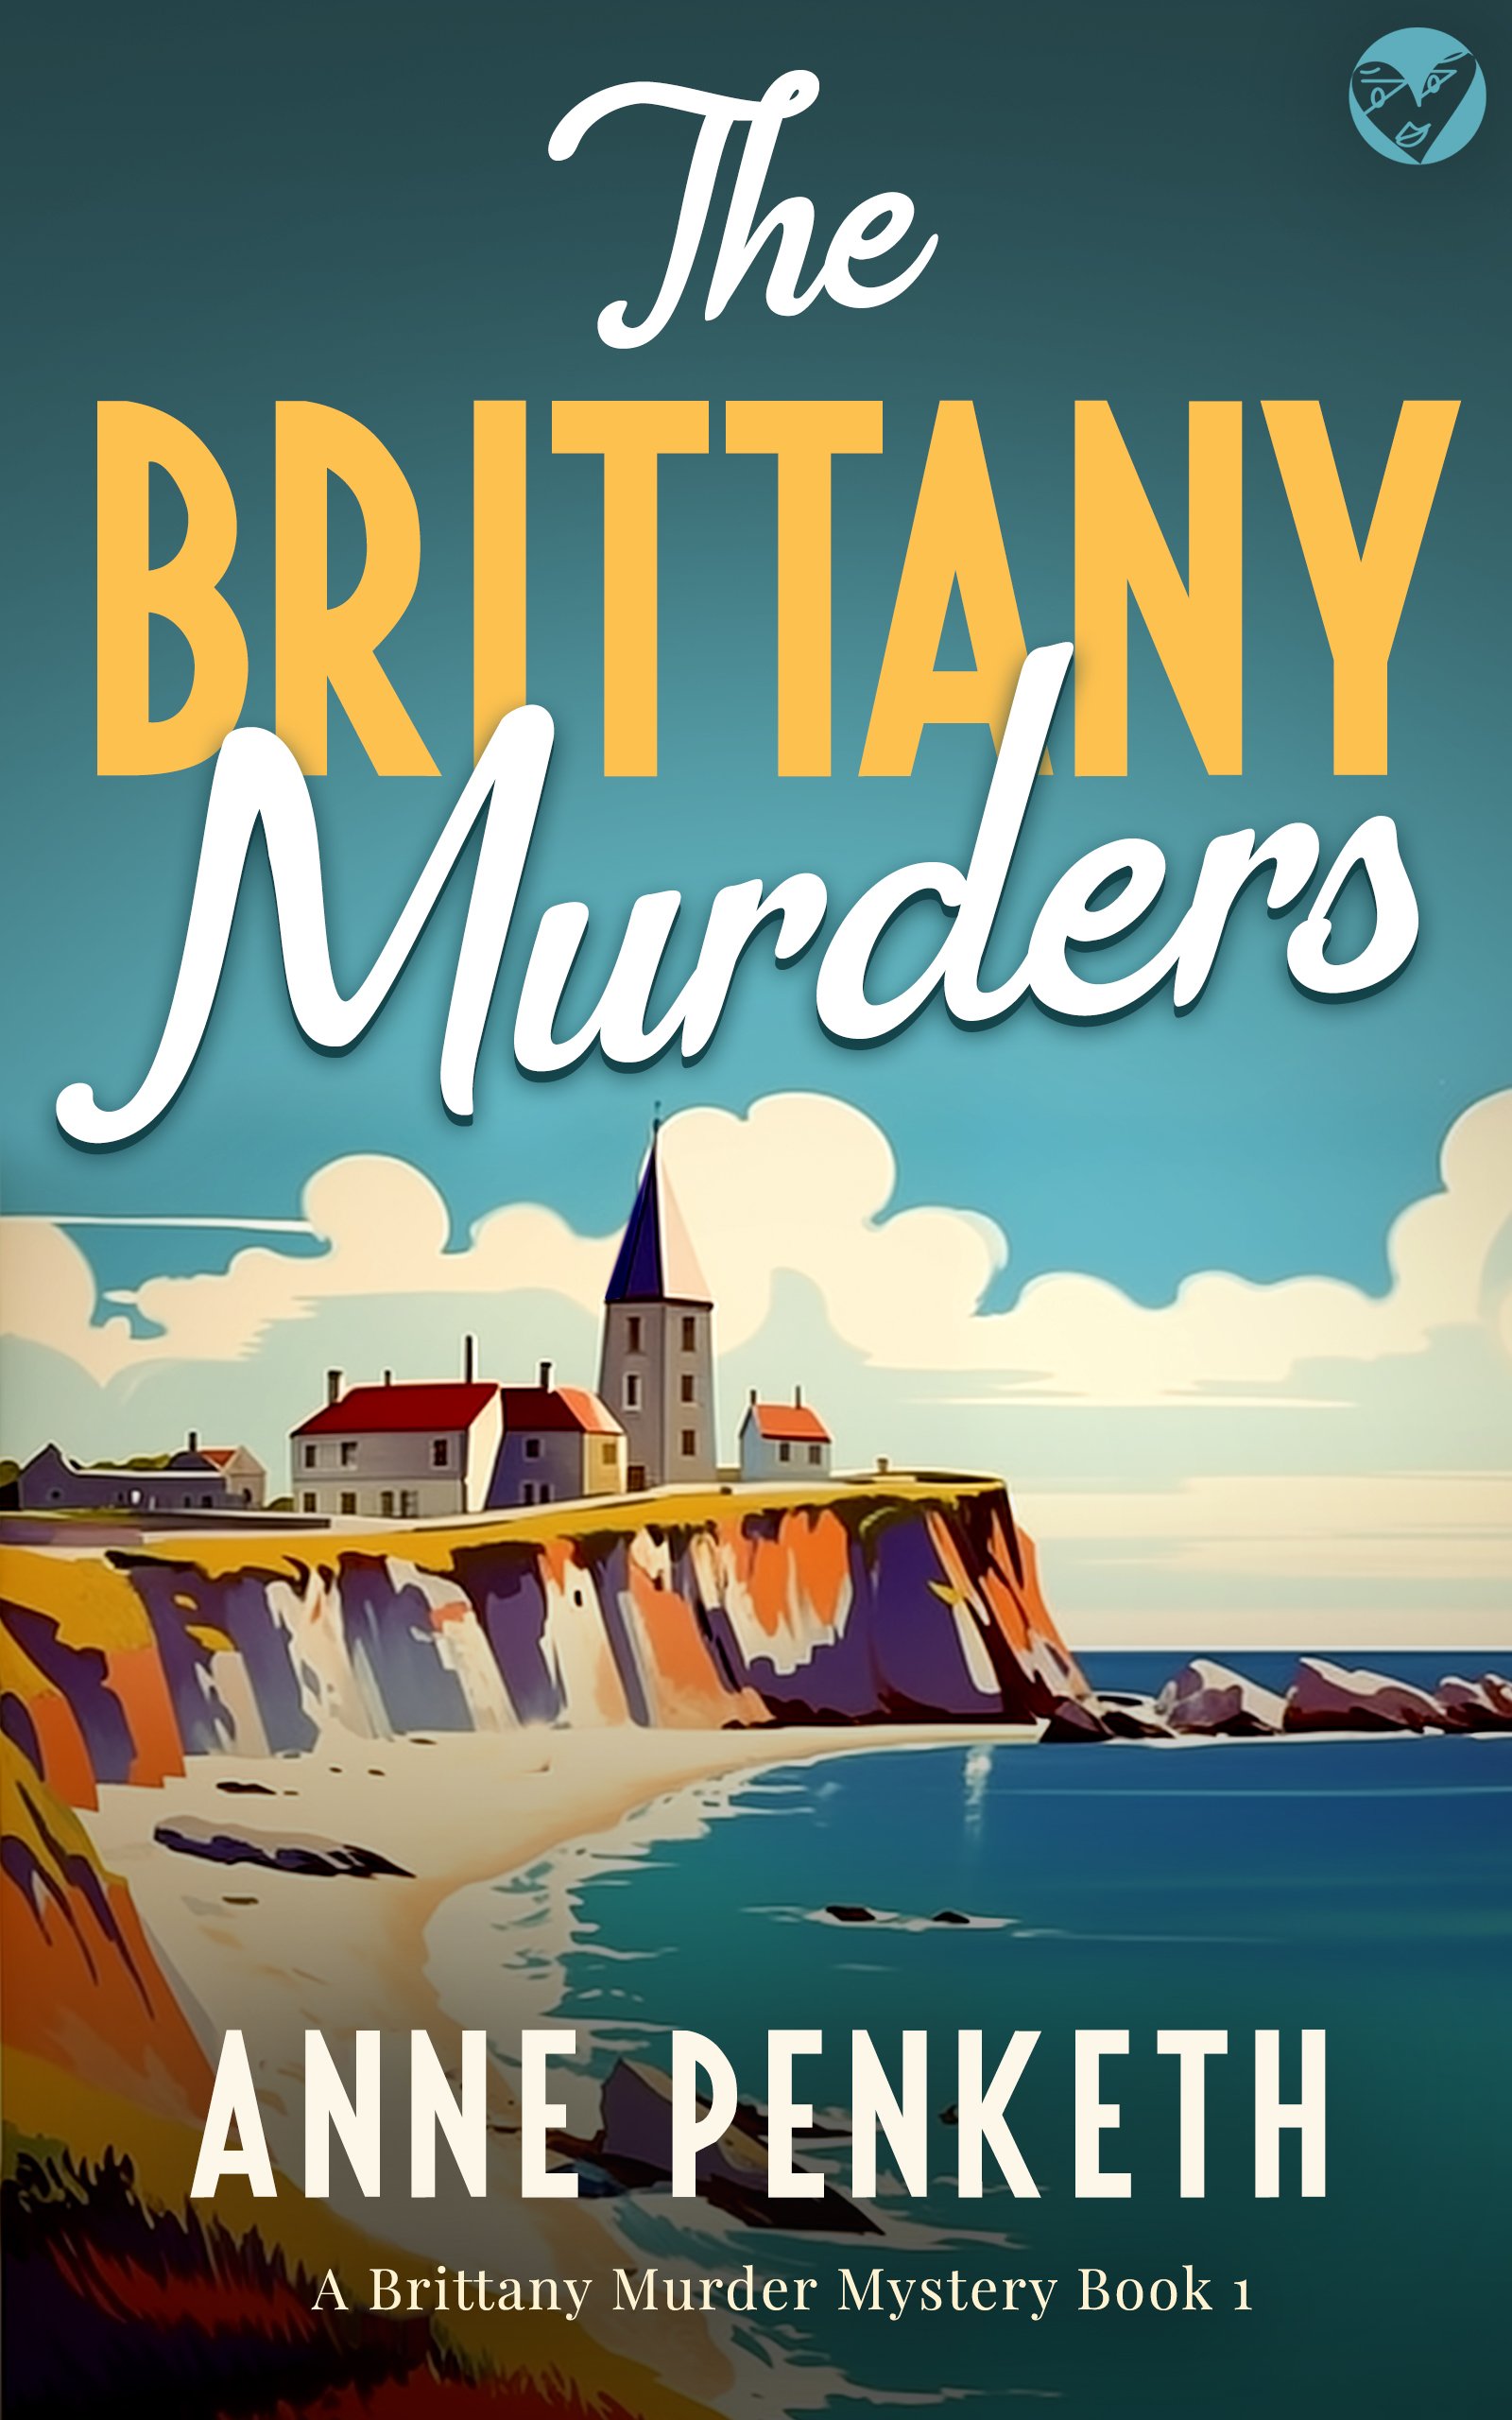 THE BRITTANY MURDERS cover publish.jpg